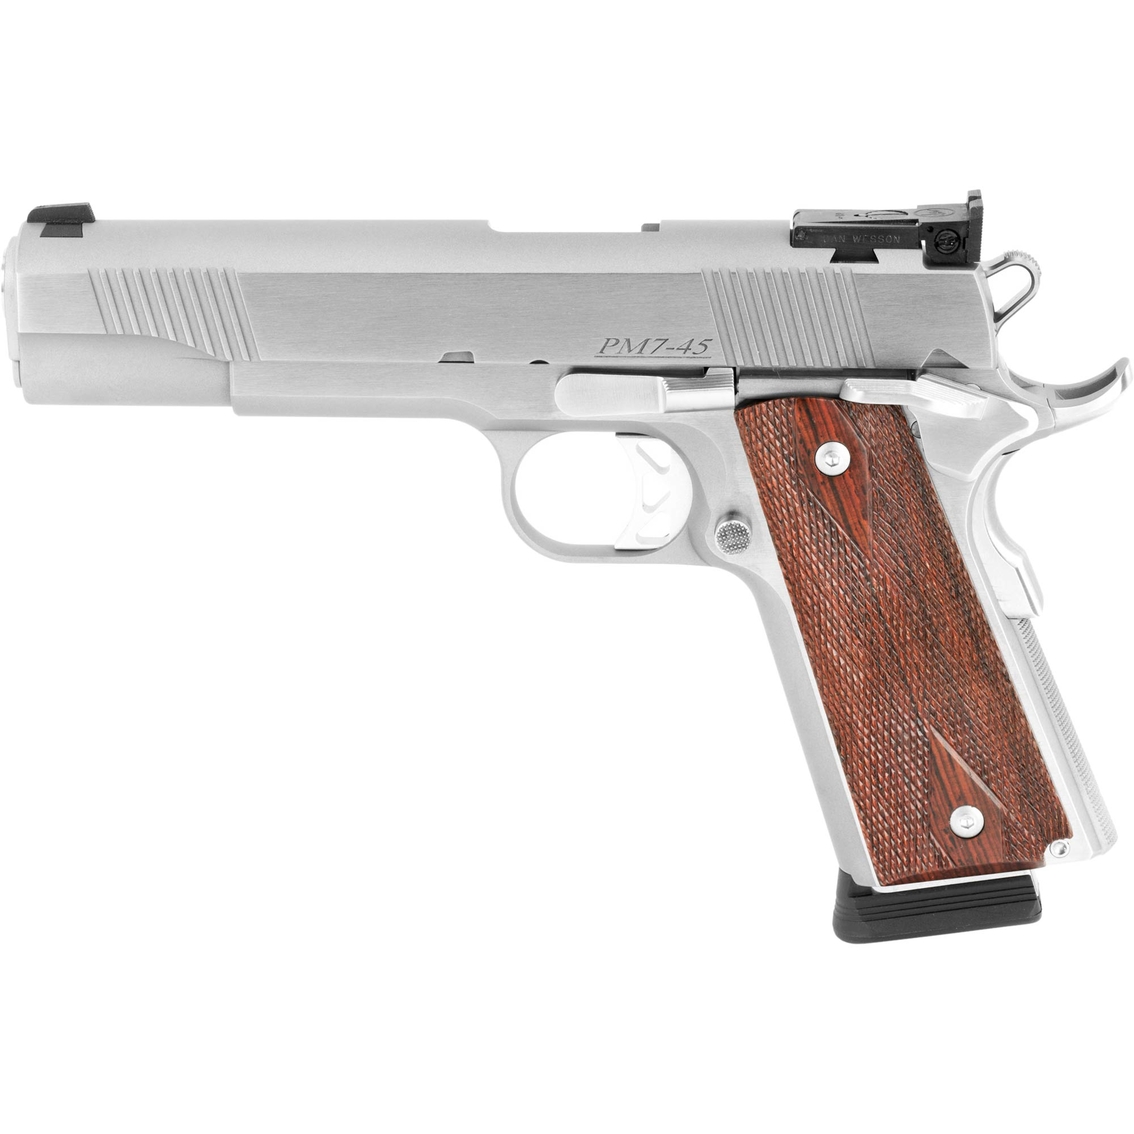 Dan Wesson Pointman Seven 45 ACP 5 in. Barrel 8 Rds 2-Mags Pistol Stainless Steel - Image 2 of 3